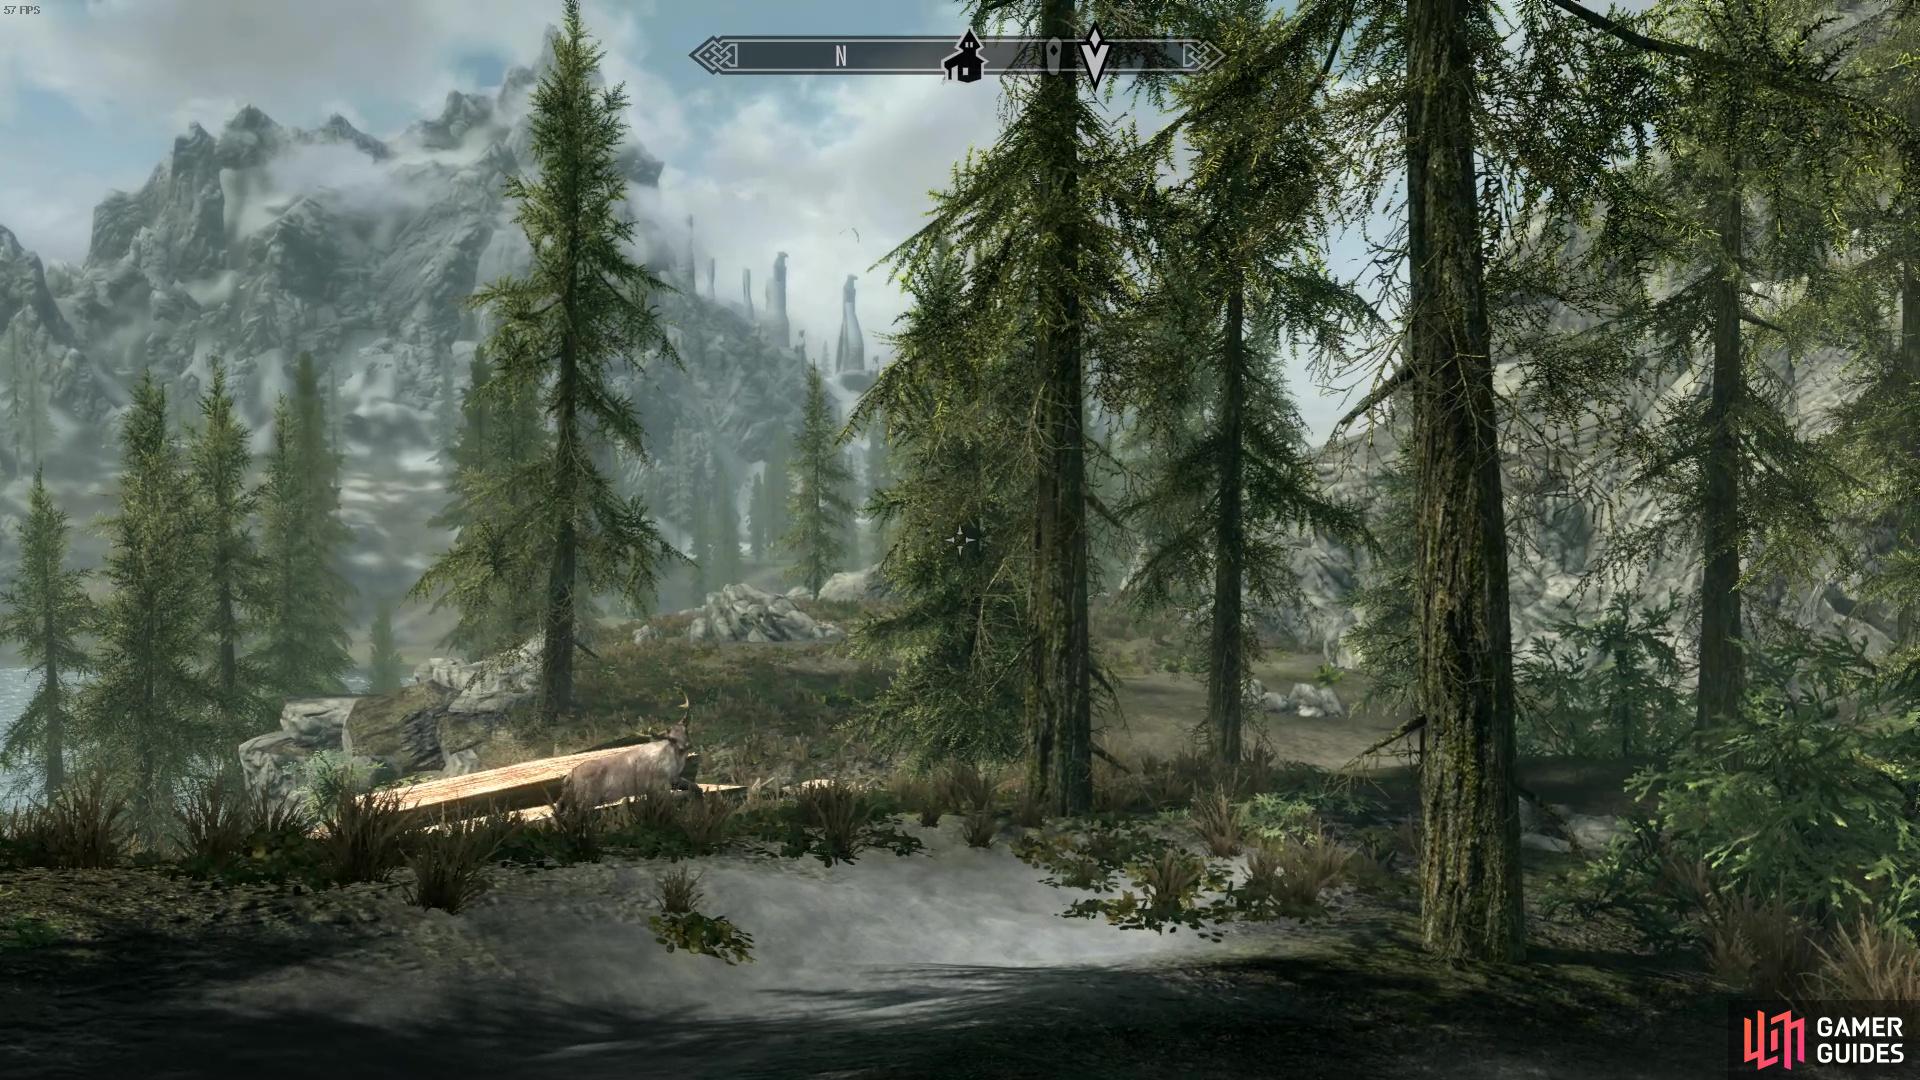 The plot of land in Falkreath is woody and overlooks a large lake. 